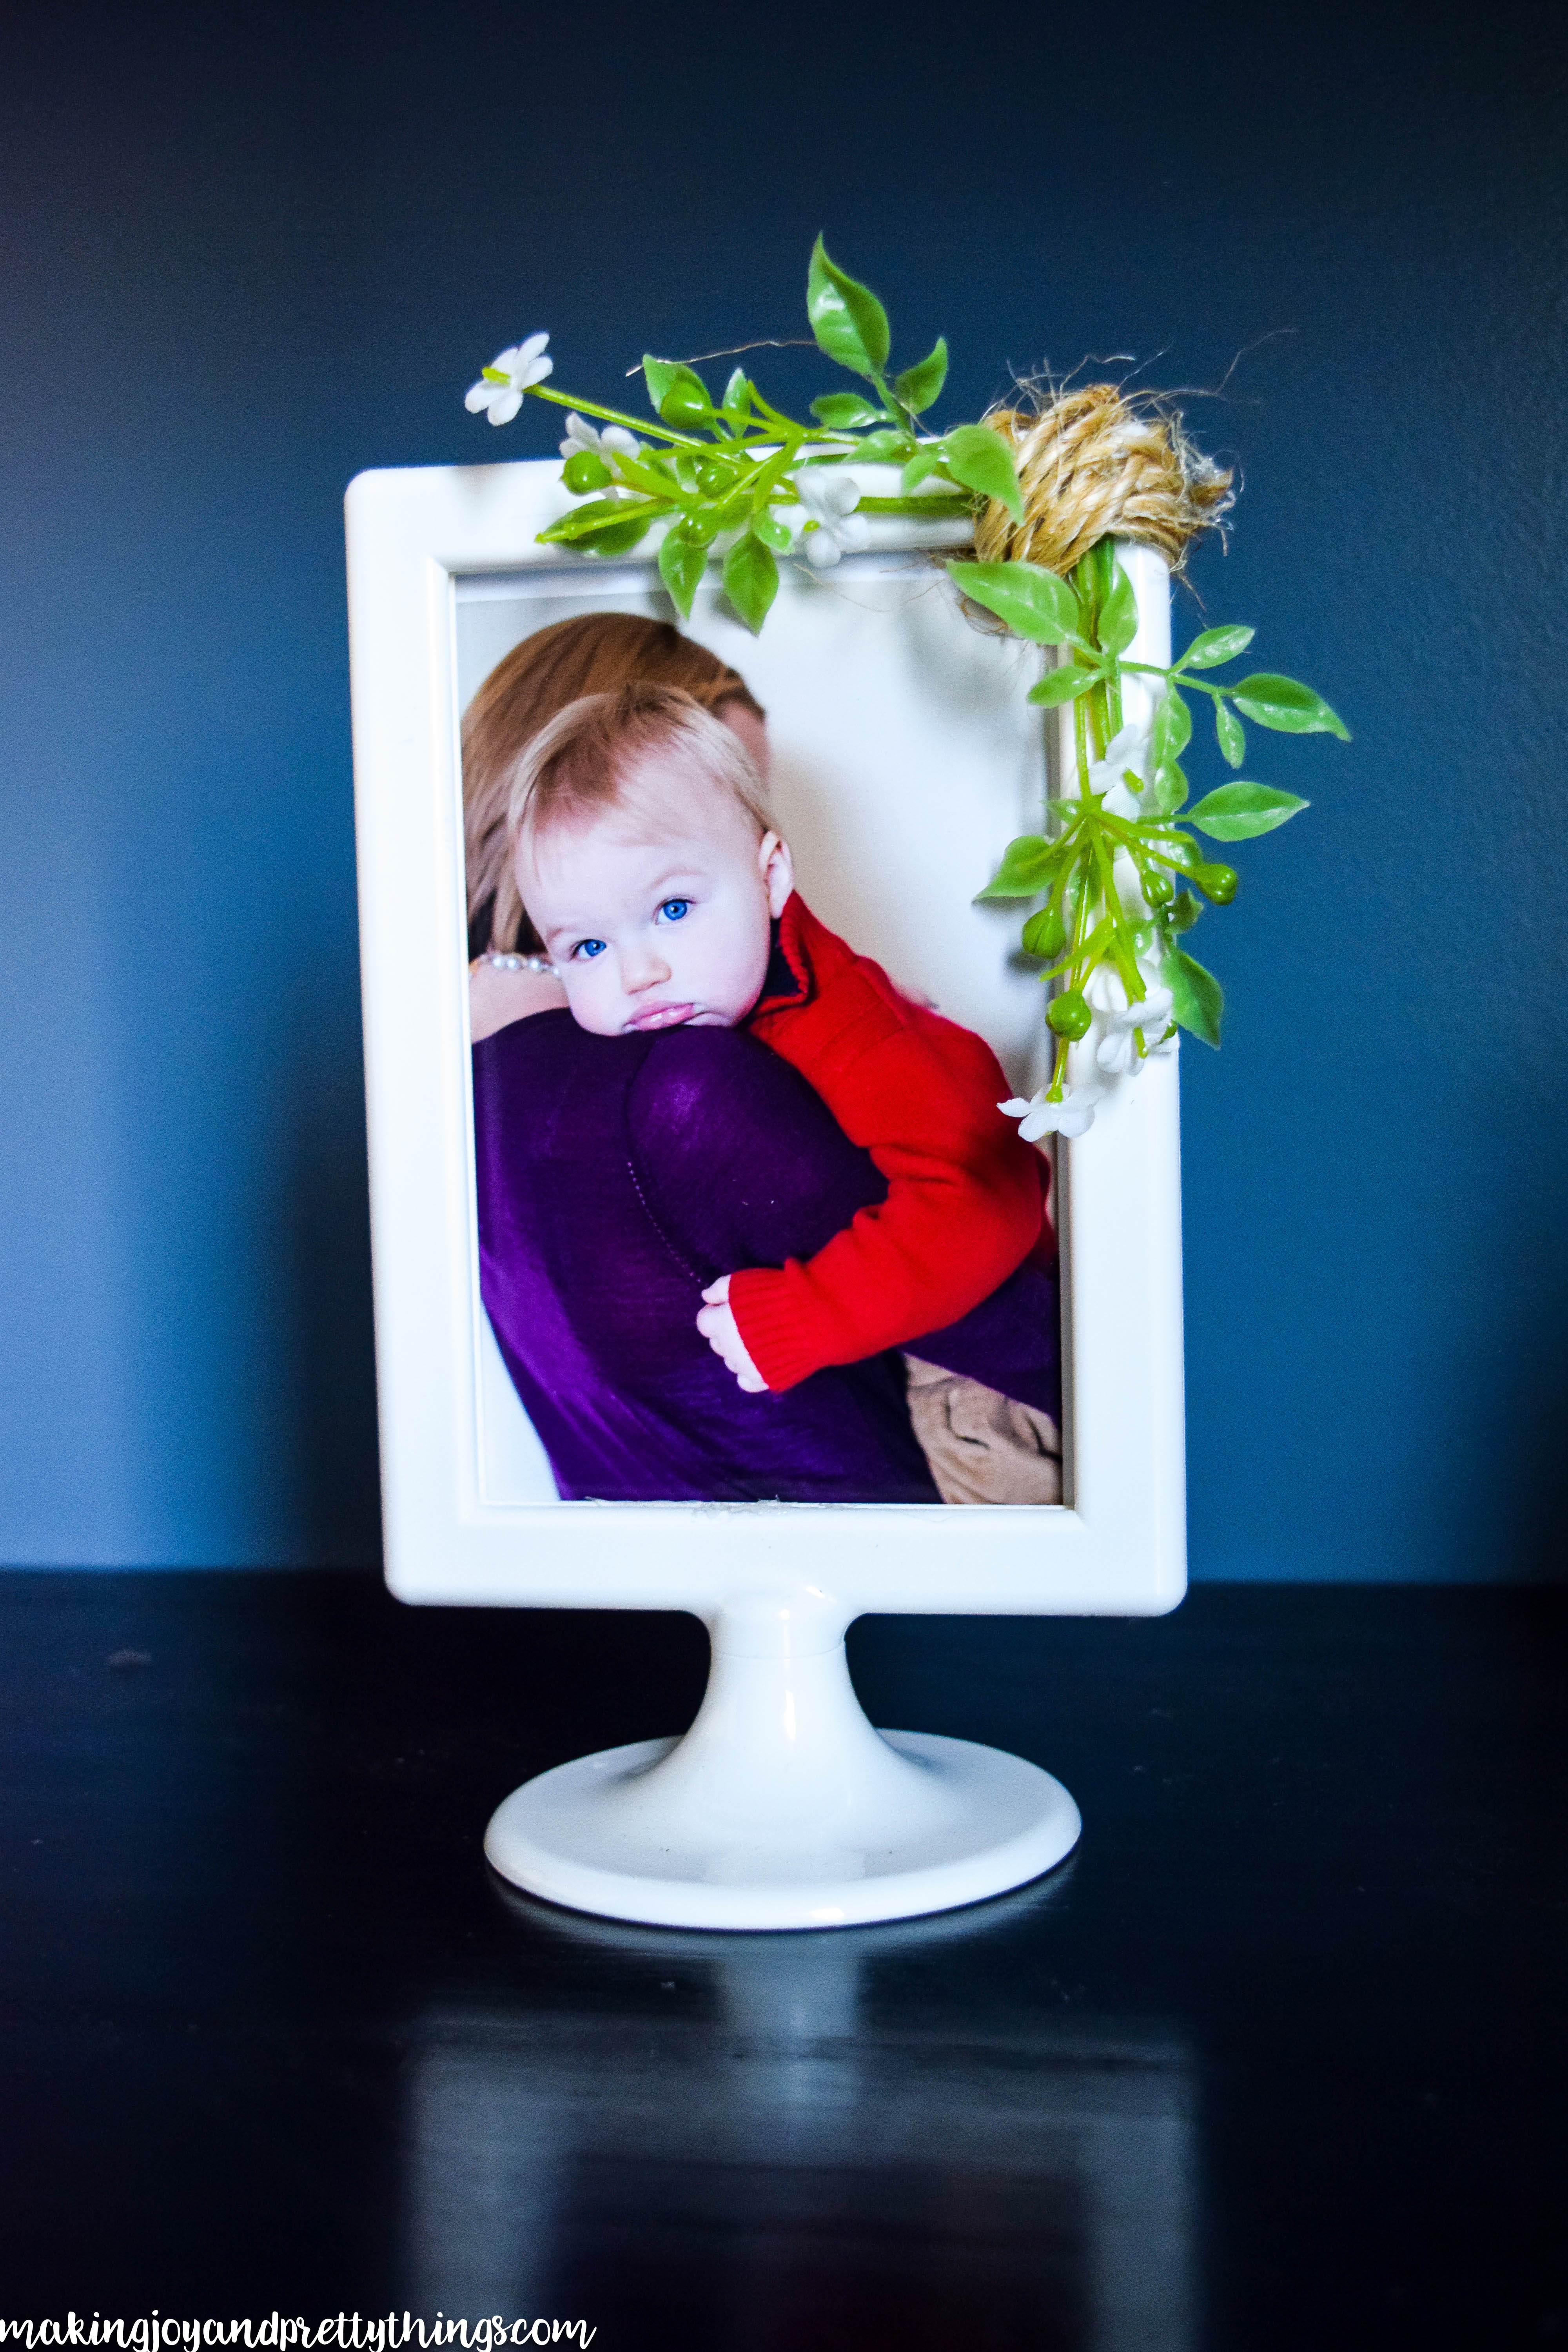 A simple white farmhouse frame with sprigs of faux greenery and small white flowers sits on a wood surface in front of a blue wall. The frame holds a colorful picture of a young toddler held in their mother's arms, looking over mother's shoulder directly into the camera.